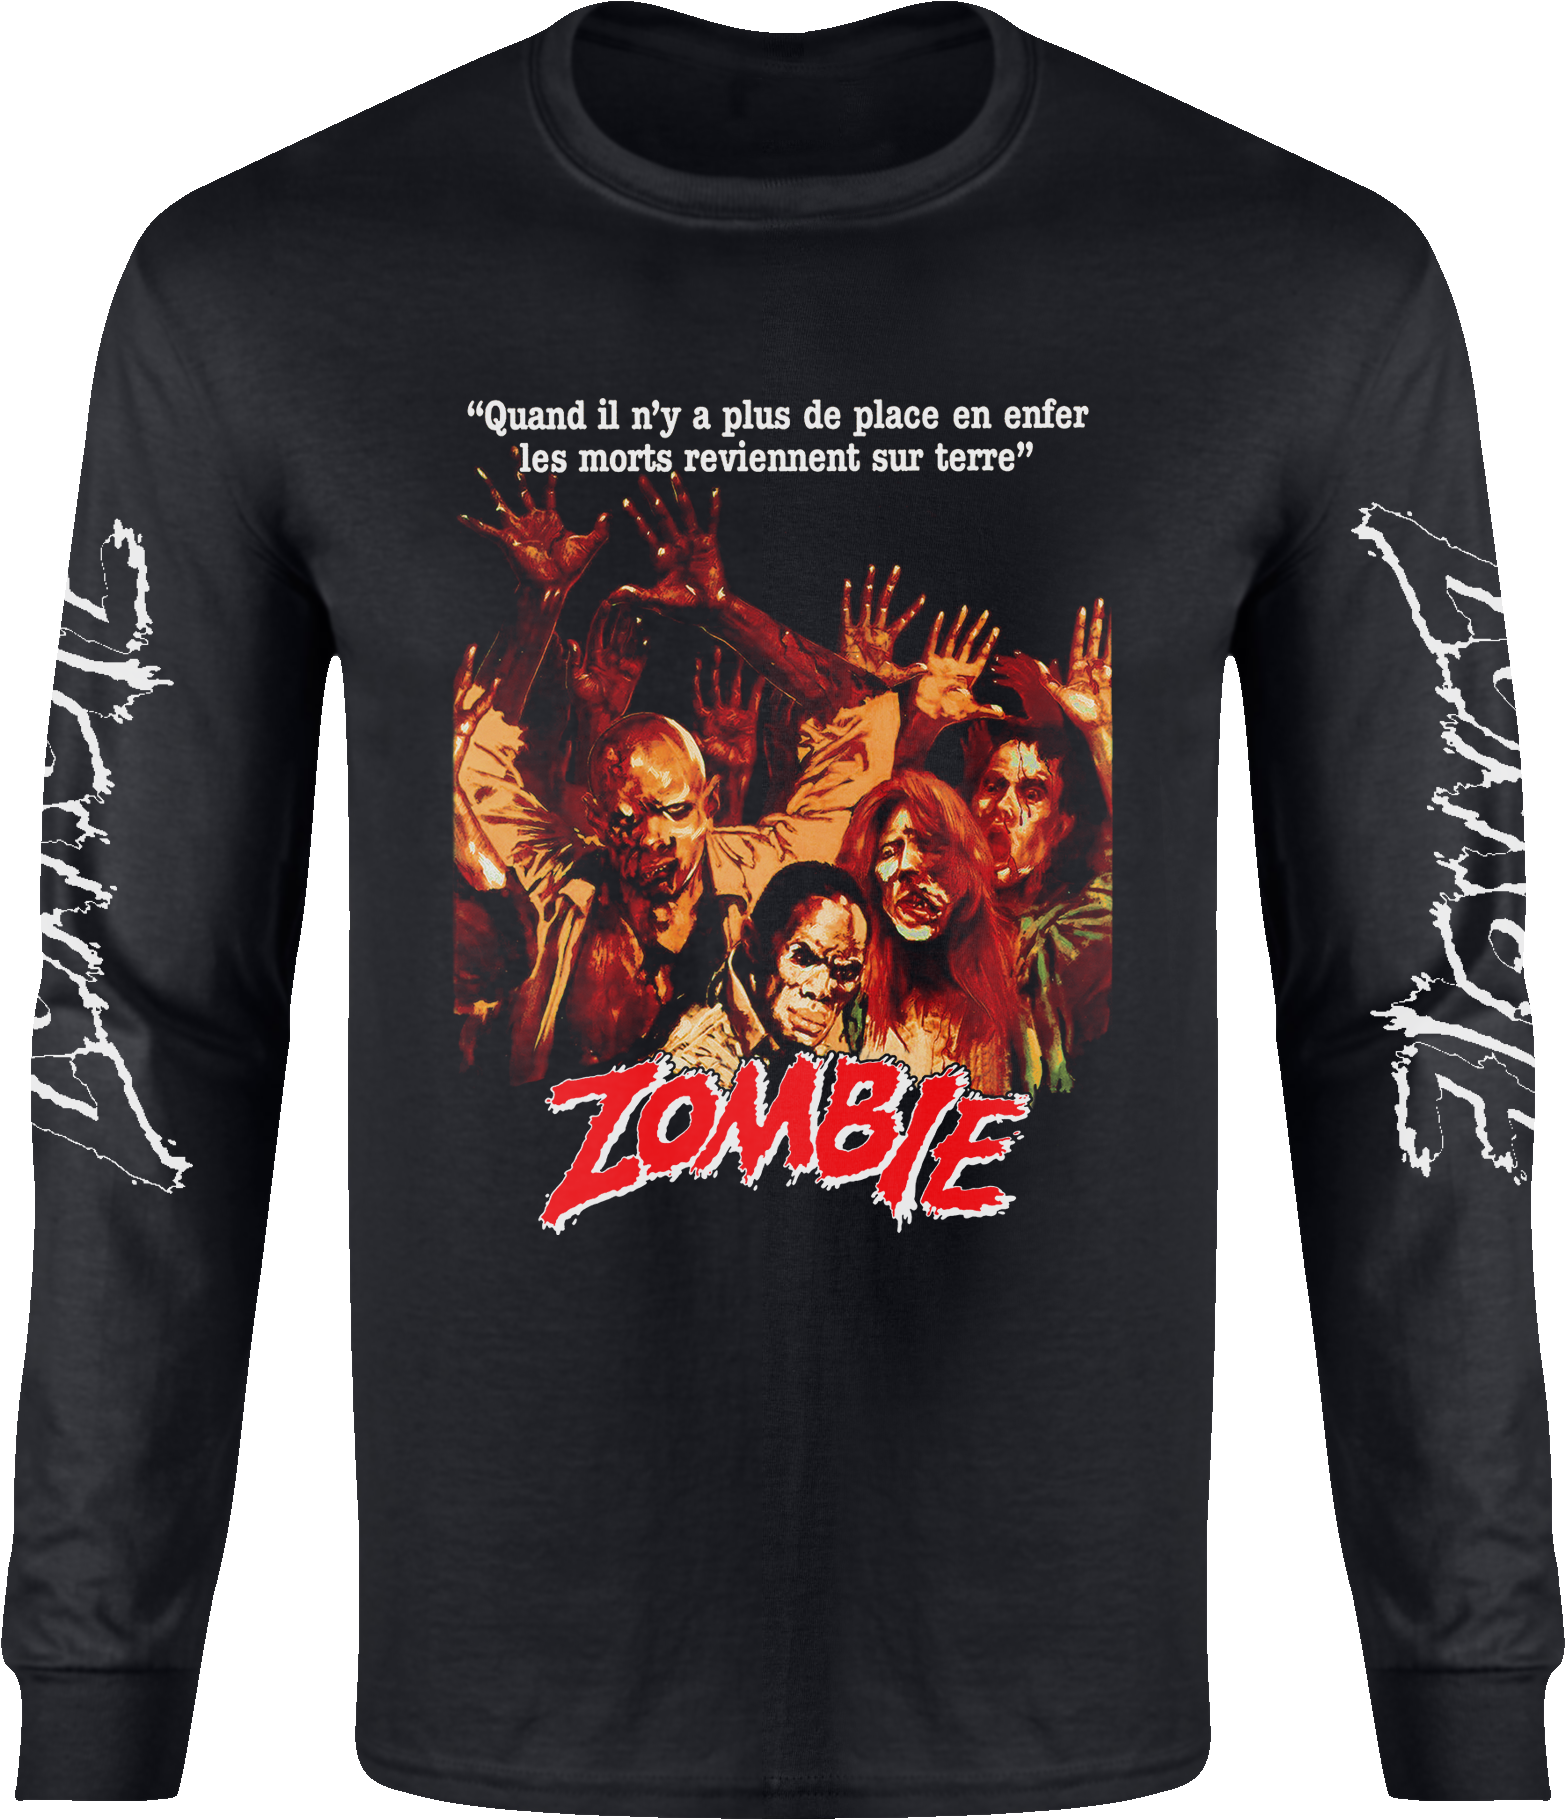 DARIO ARGENTO "ZOMBIE" FRENCH POSTER LONG SLEEVE T-SHIRT